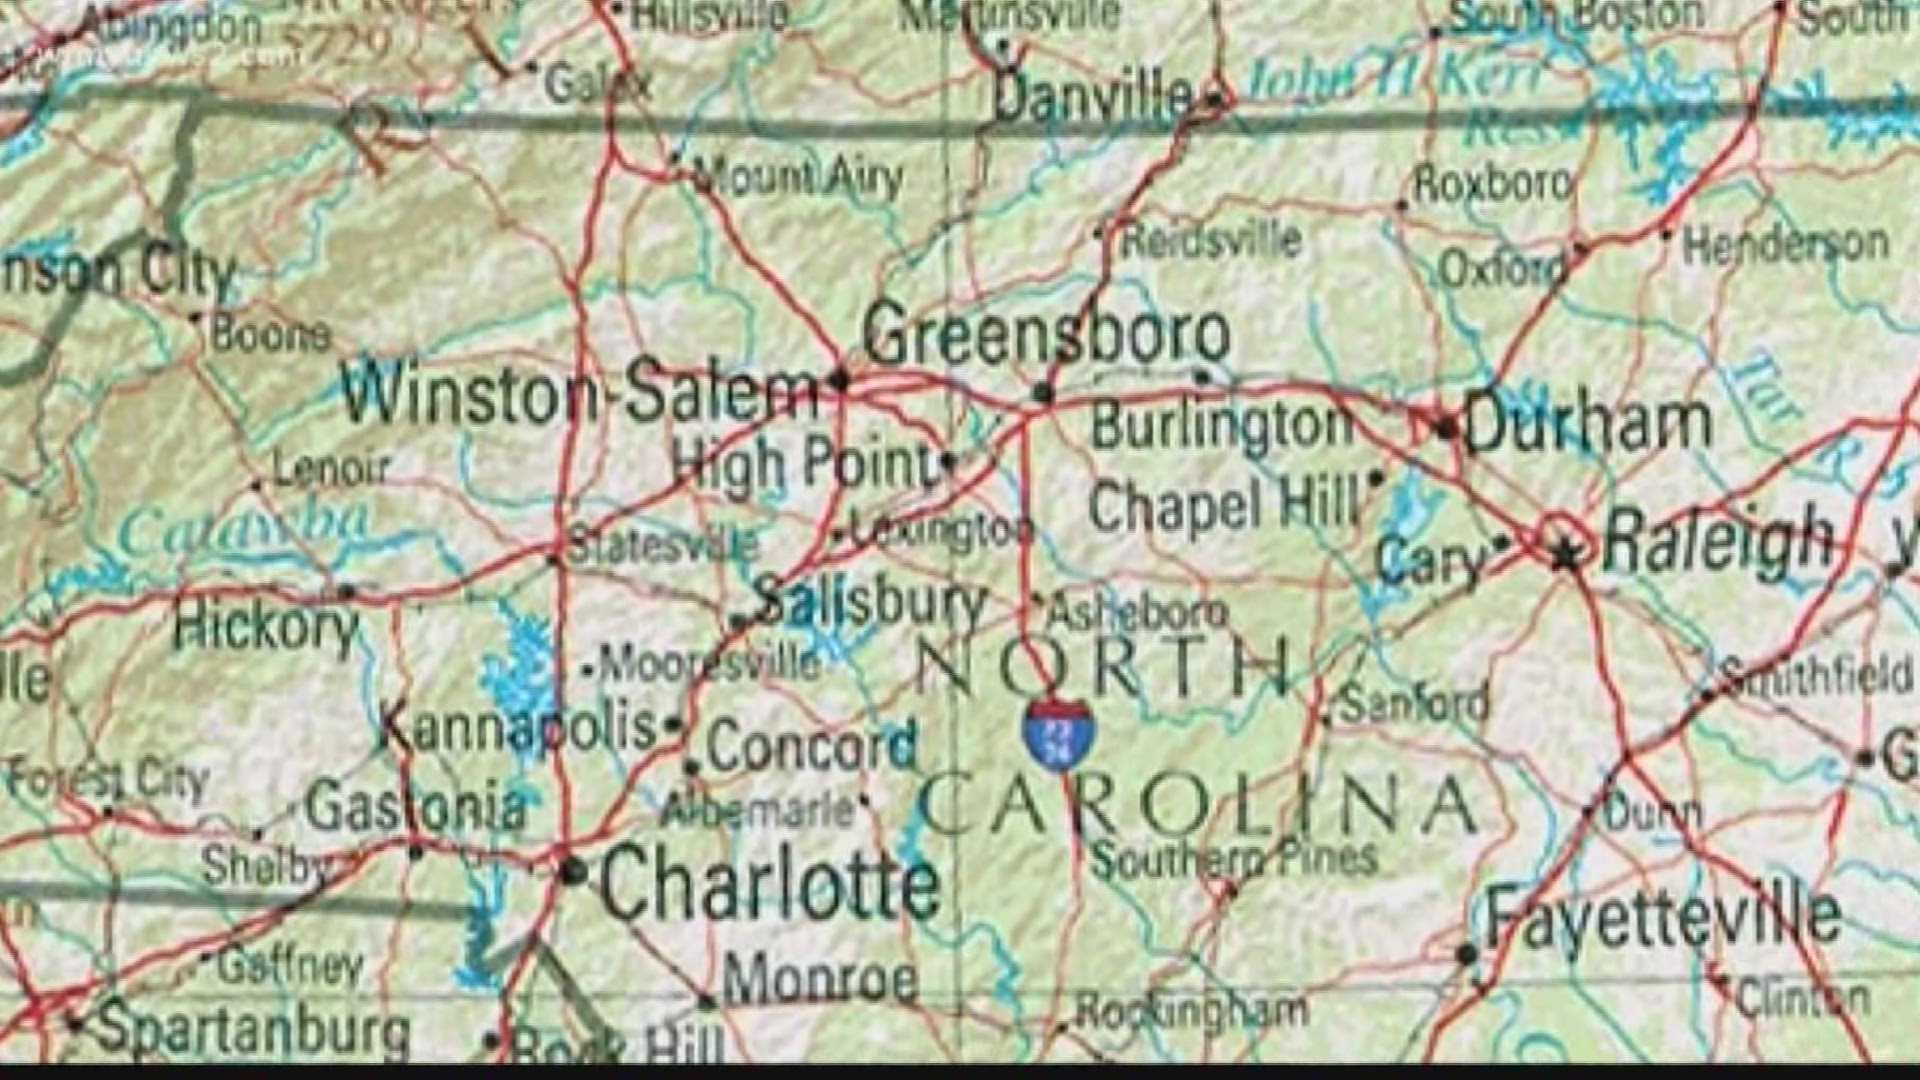 Greensboro, Burlington, Reidsville. When they were incorporated, their residents named them. But long ago, the name of a town said a lot about its population or surroundings.